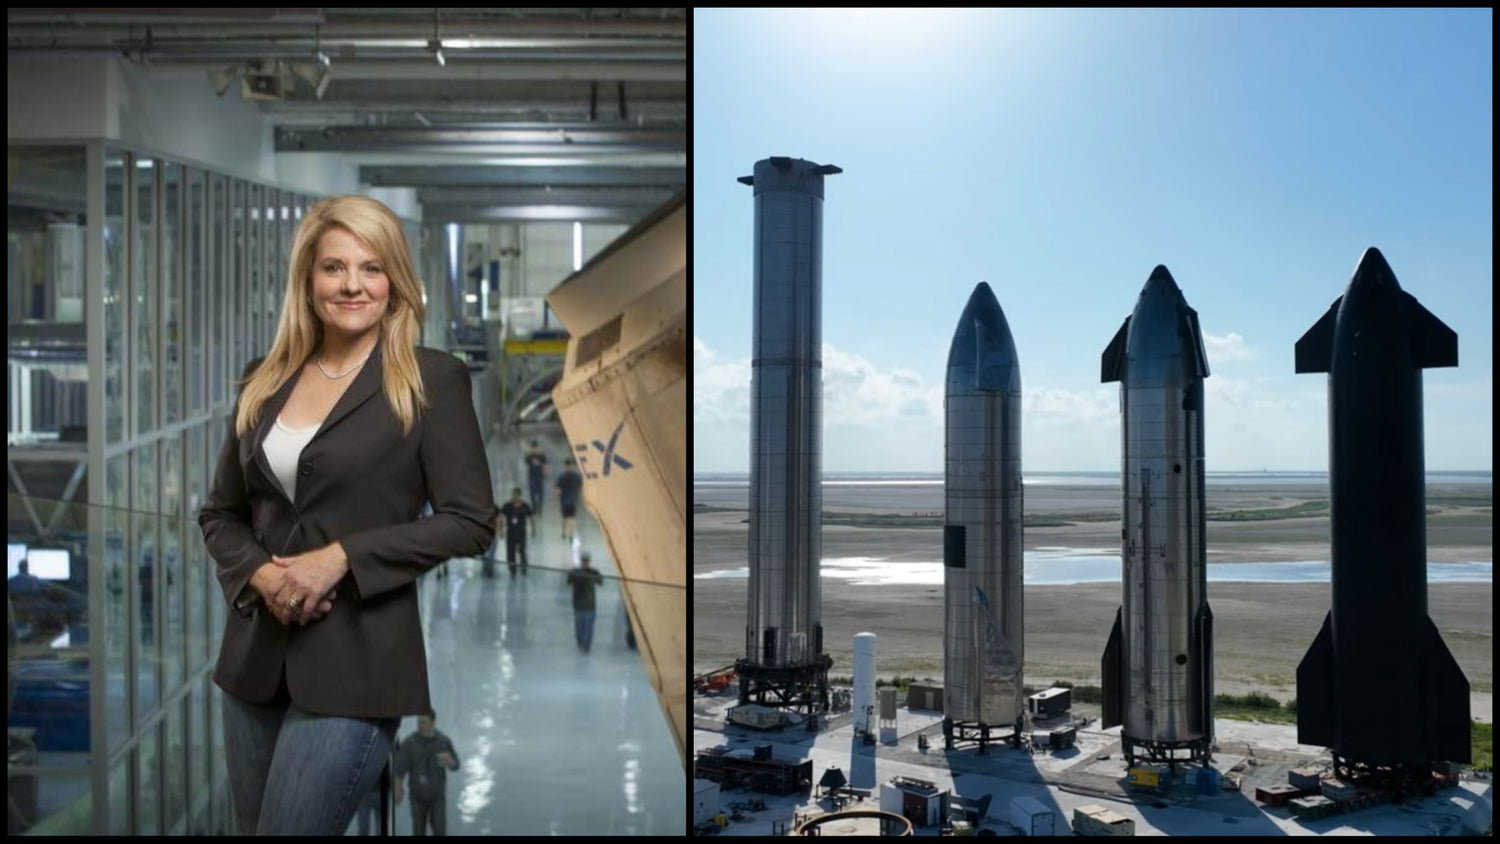 SpaceX President Gwynne Shotwell Will Oversee Starship Development Operations In Texas